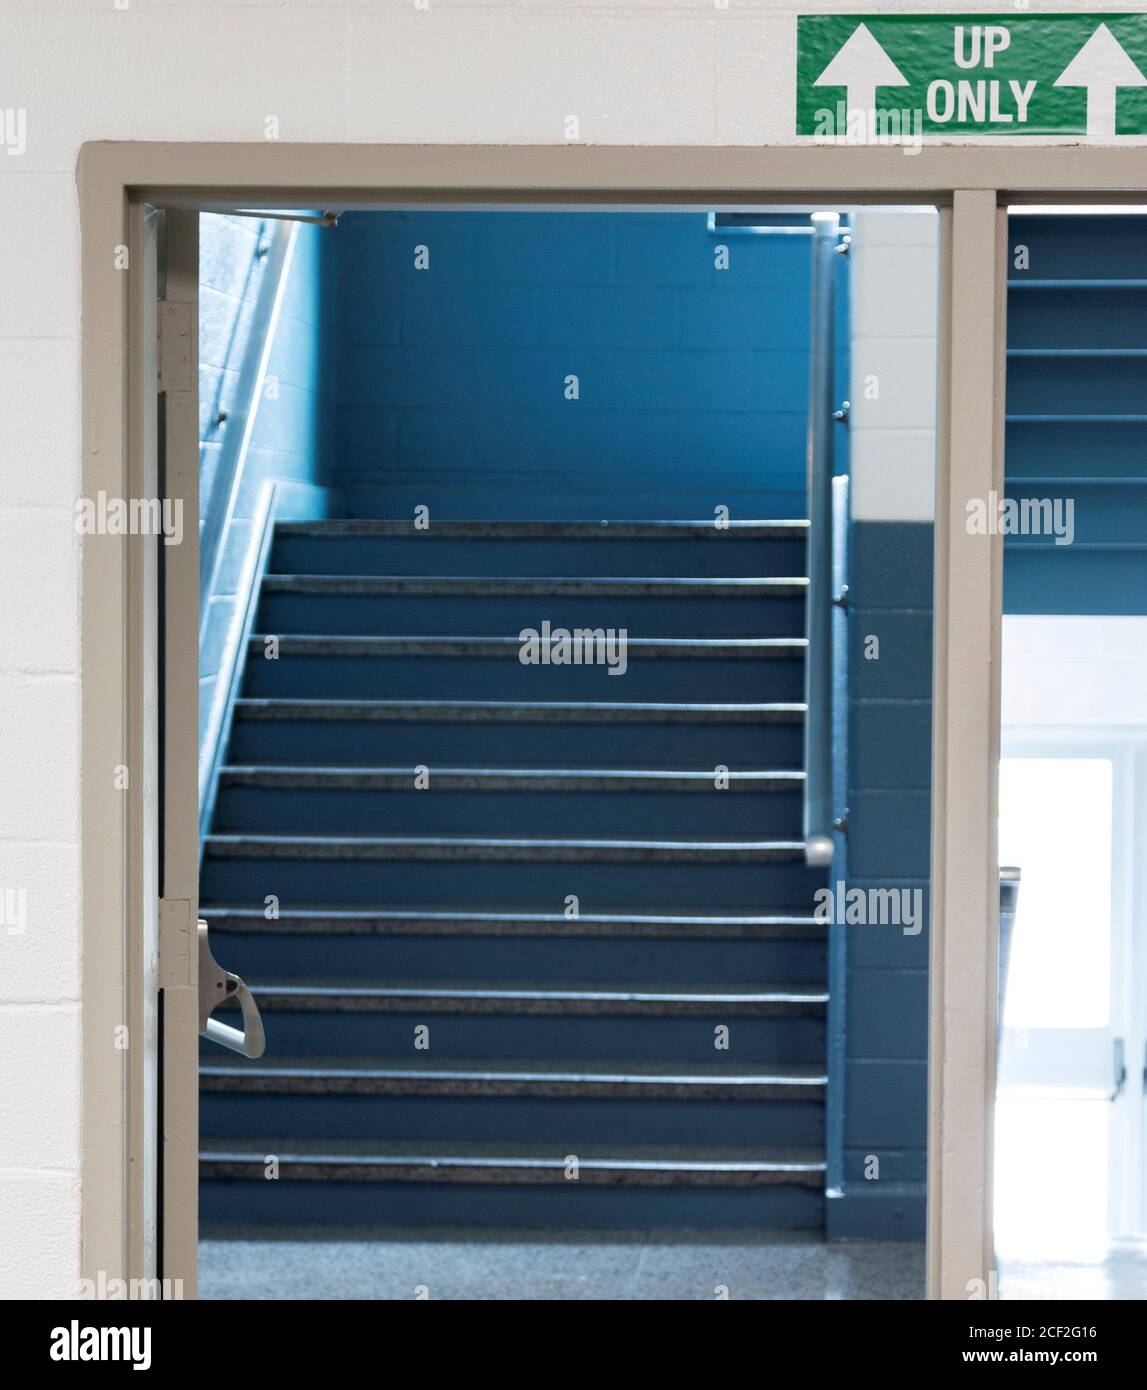 To help get back to in person teaching a high school has arrainged up and down only staircases and one way halls to help the students stay six feet ap Stock Photo